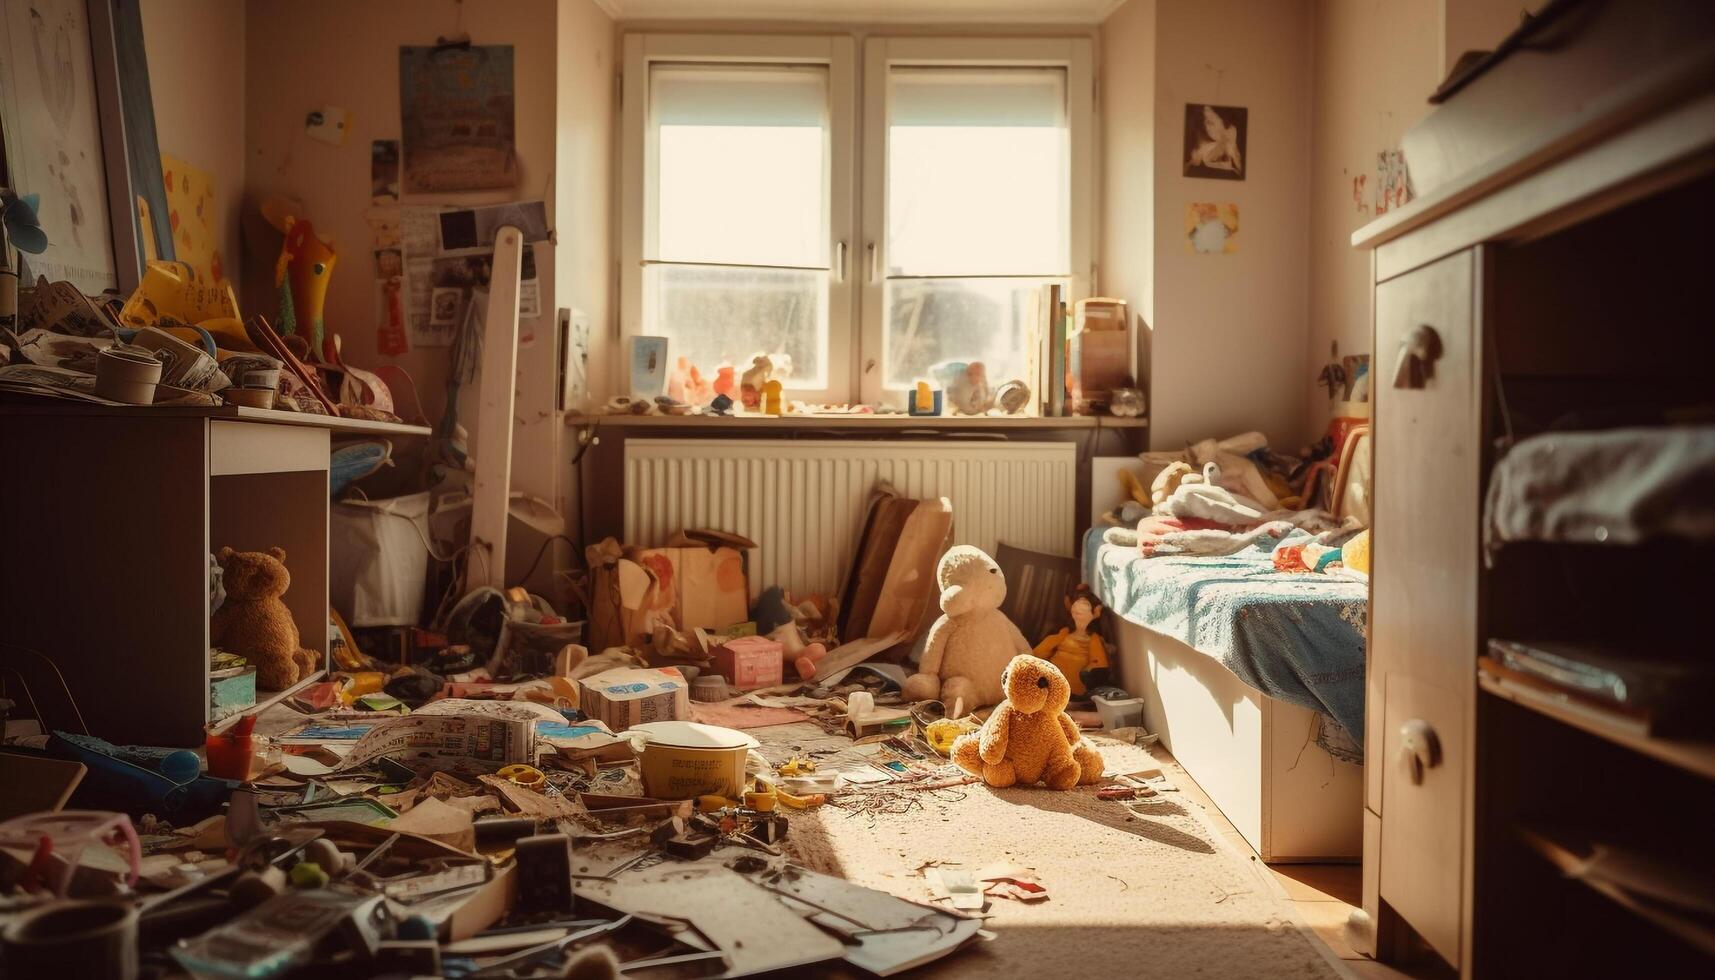 A messy bedroom with homemade crafts and a cute toy generated by AI photo